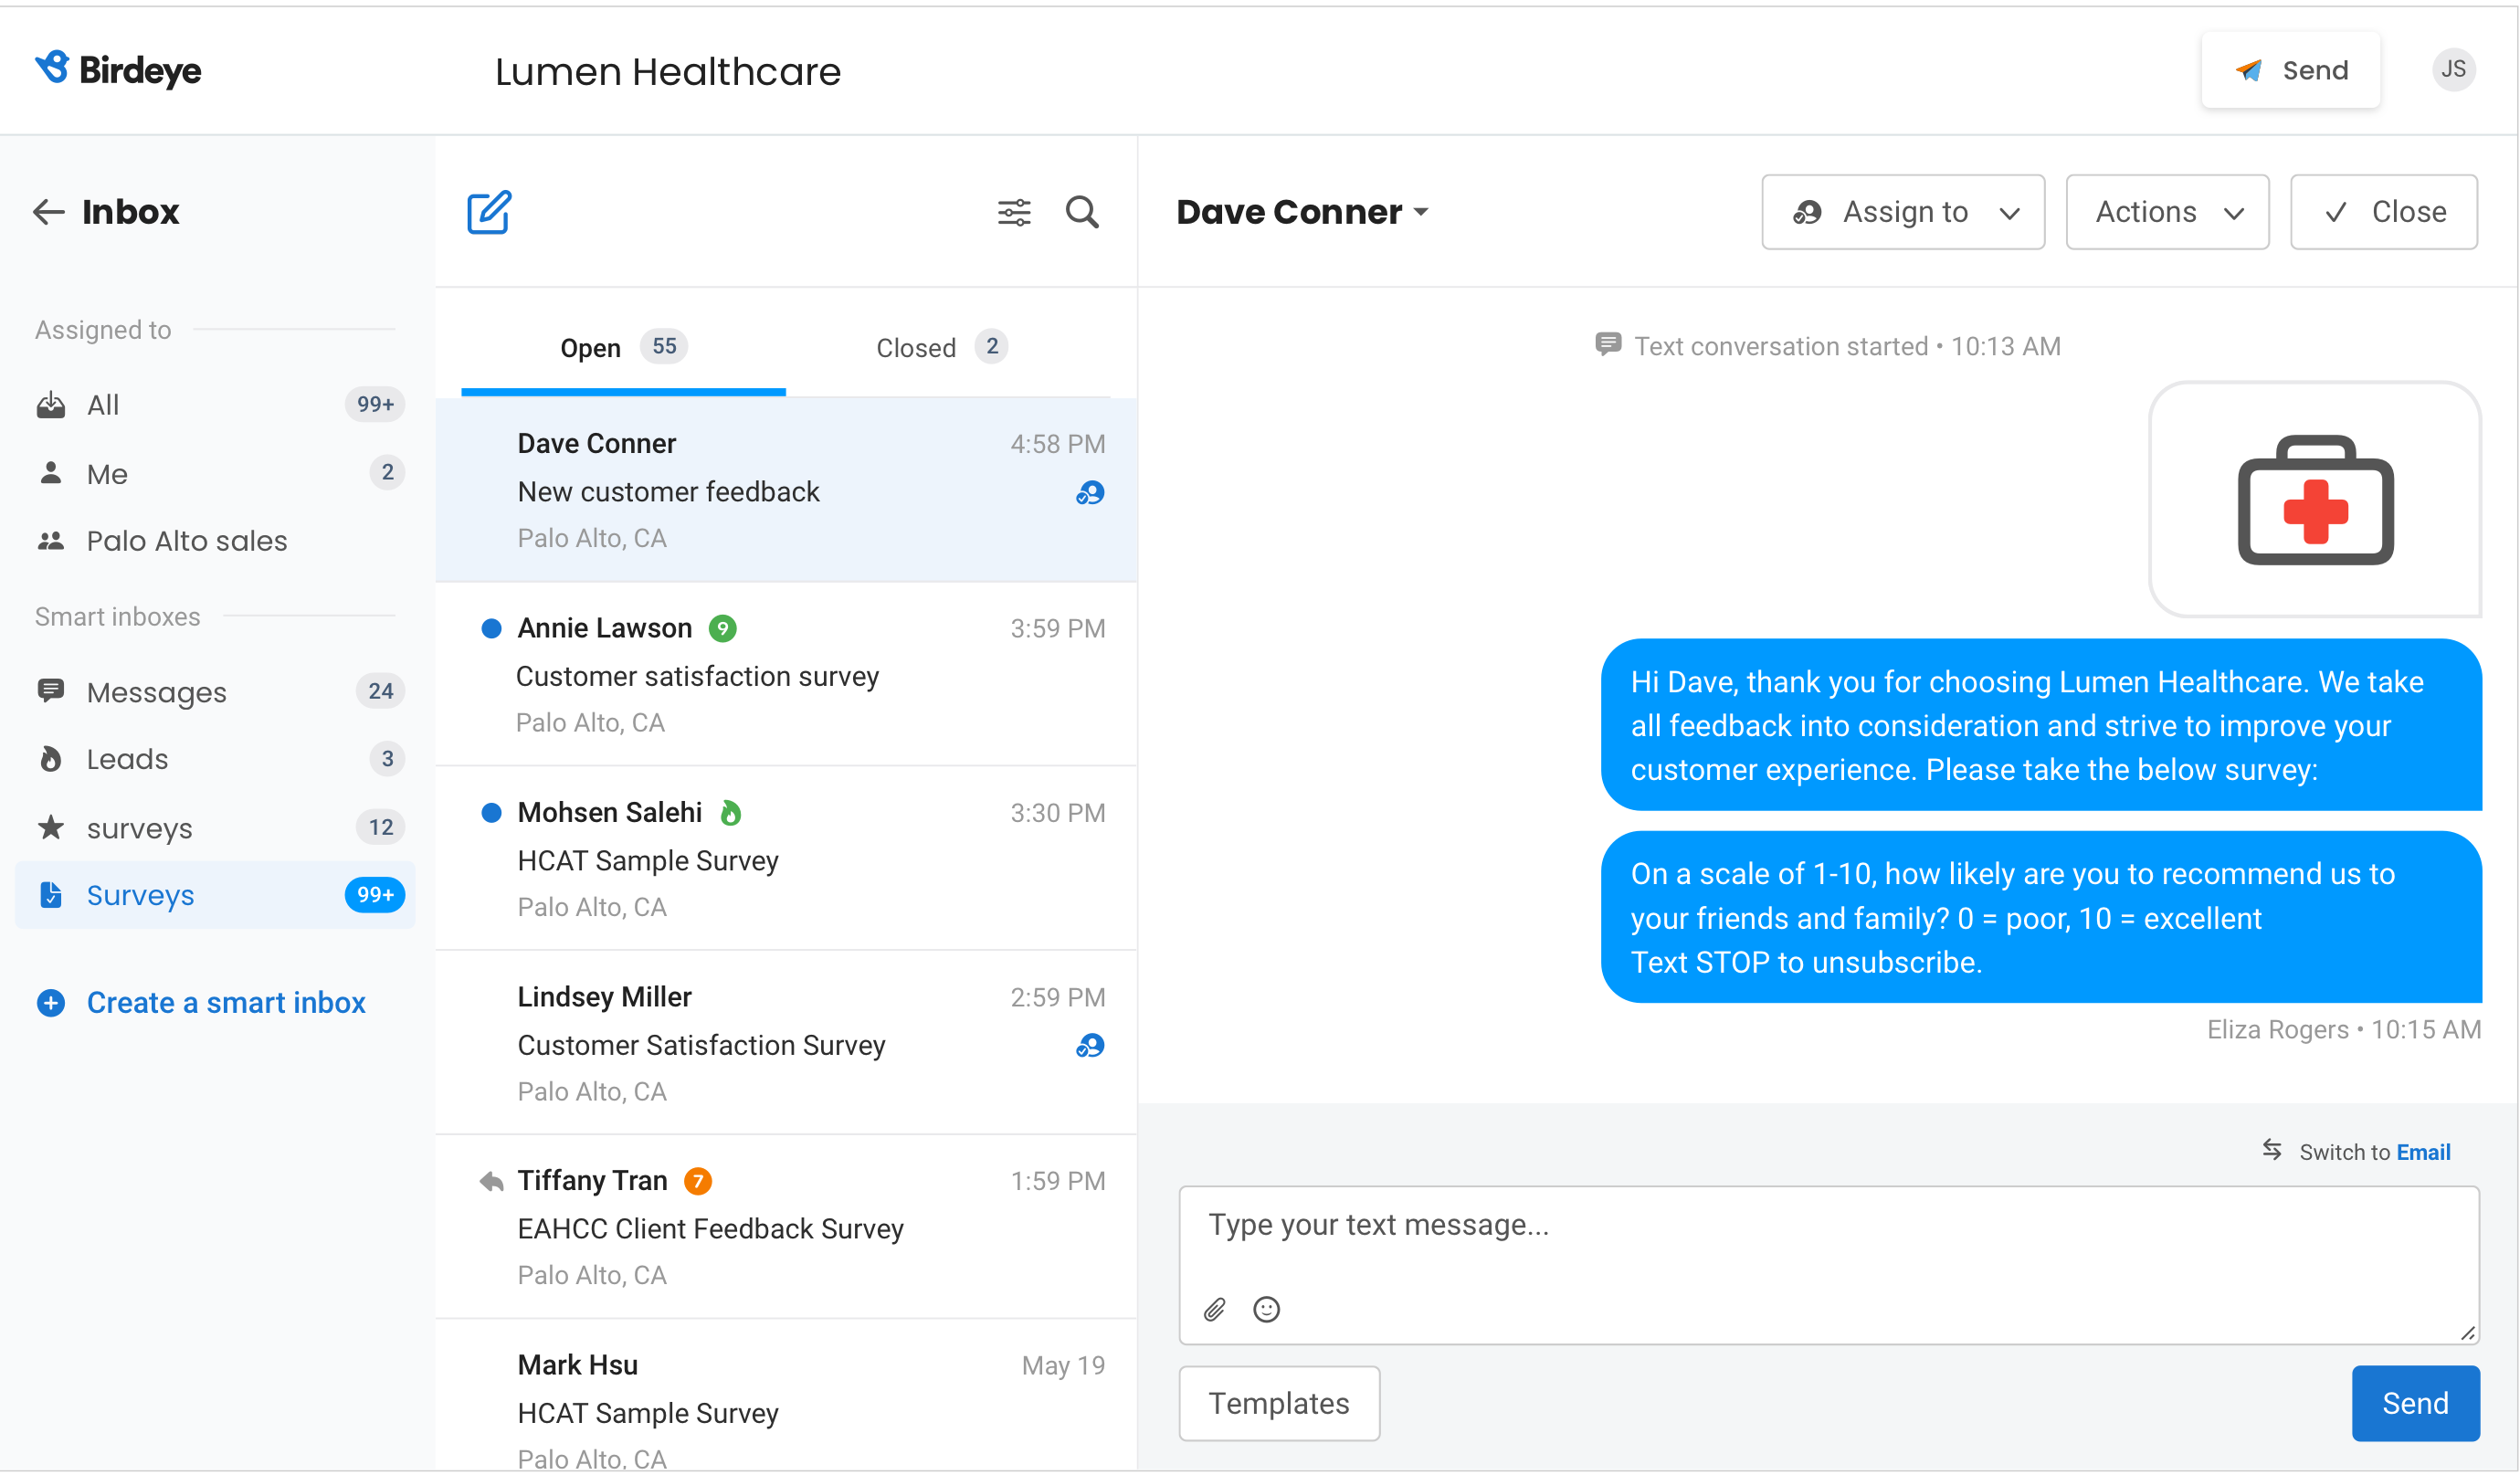 Unified inbox - Respond to customers who chat, text or leave a review from a unified inbox